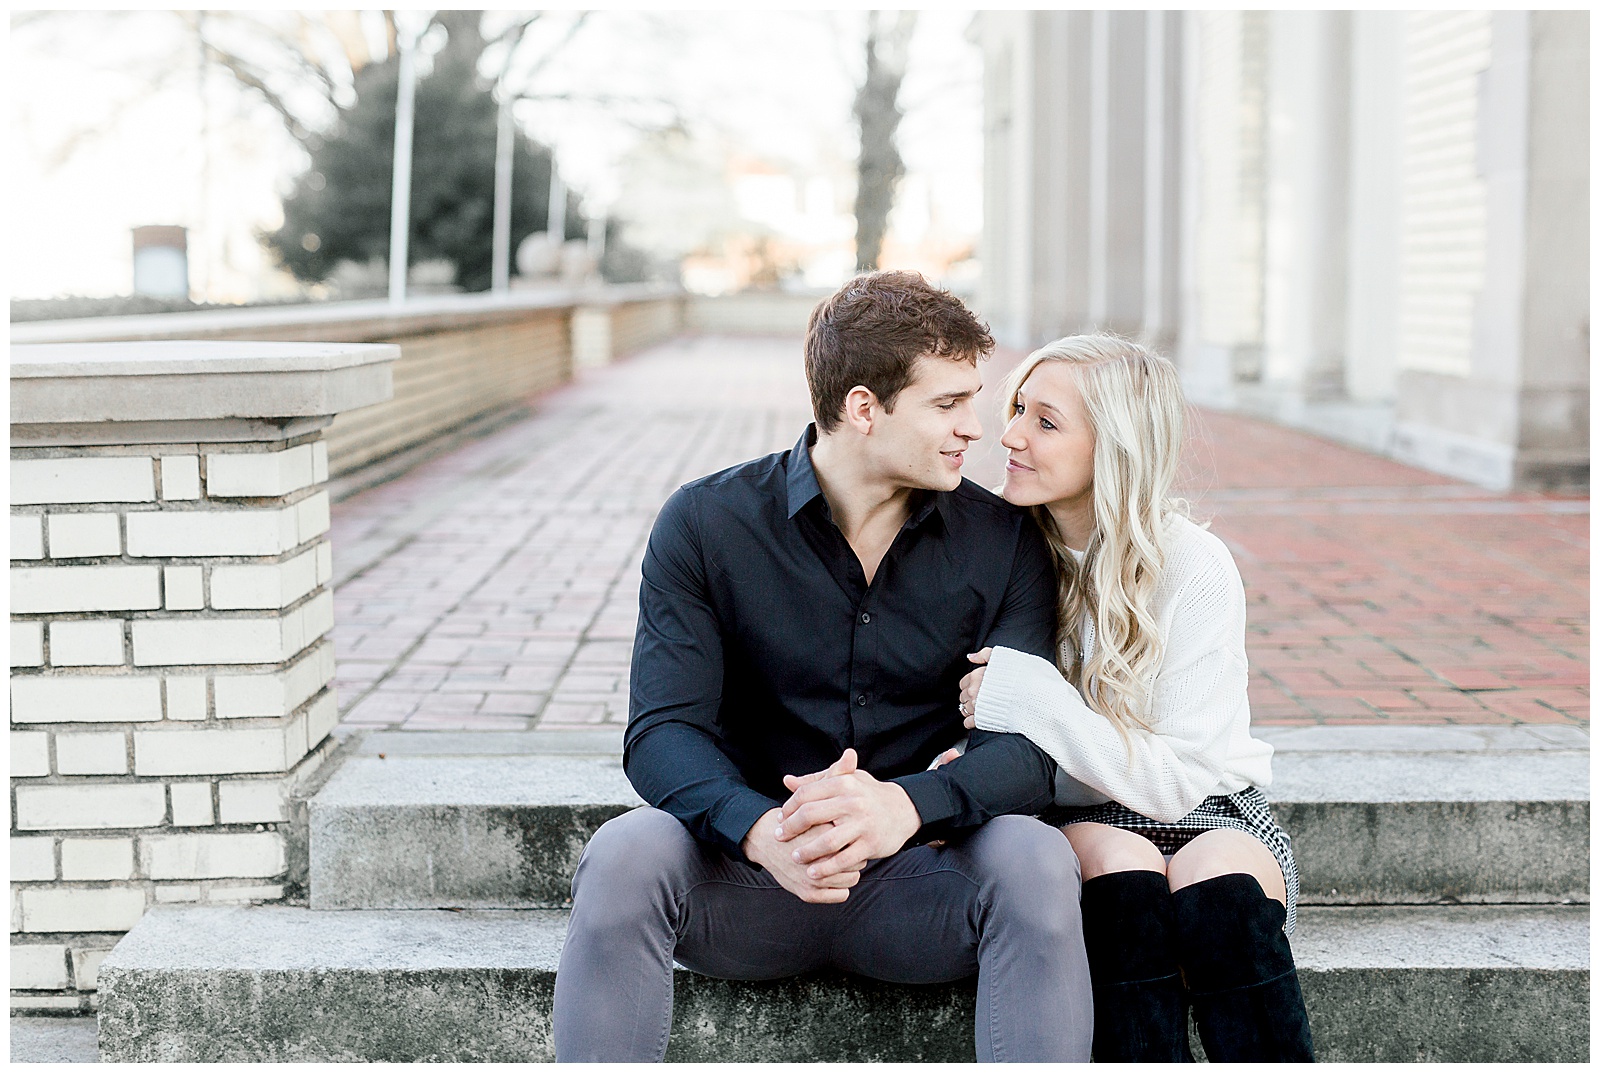 Adorable Couple Posing Outdoors in Gorgeous Light and Airy Separk Mansion Winter Engagement Session - classy cute white sweater pencil skirt and tall black boots outfit ideas